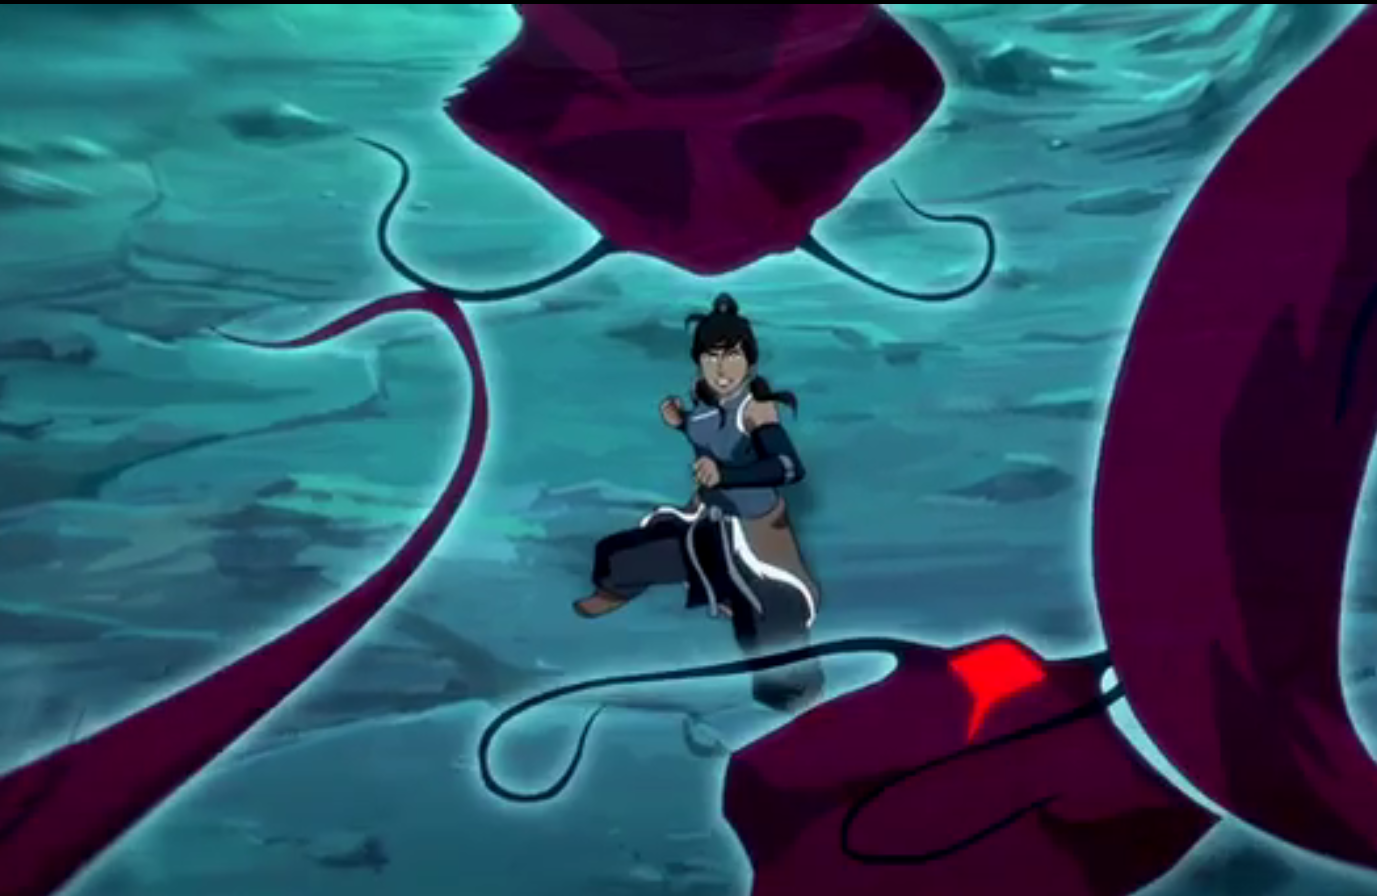 “Legend of Korra” Game Coming This Fall - Can Platinum Games Deliver?